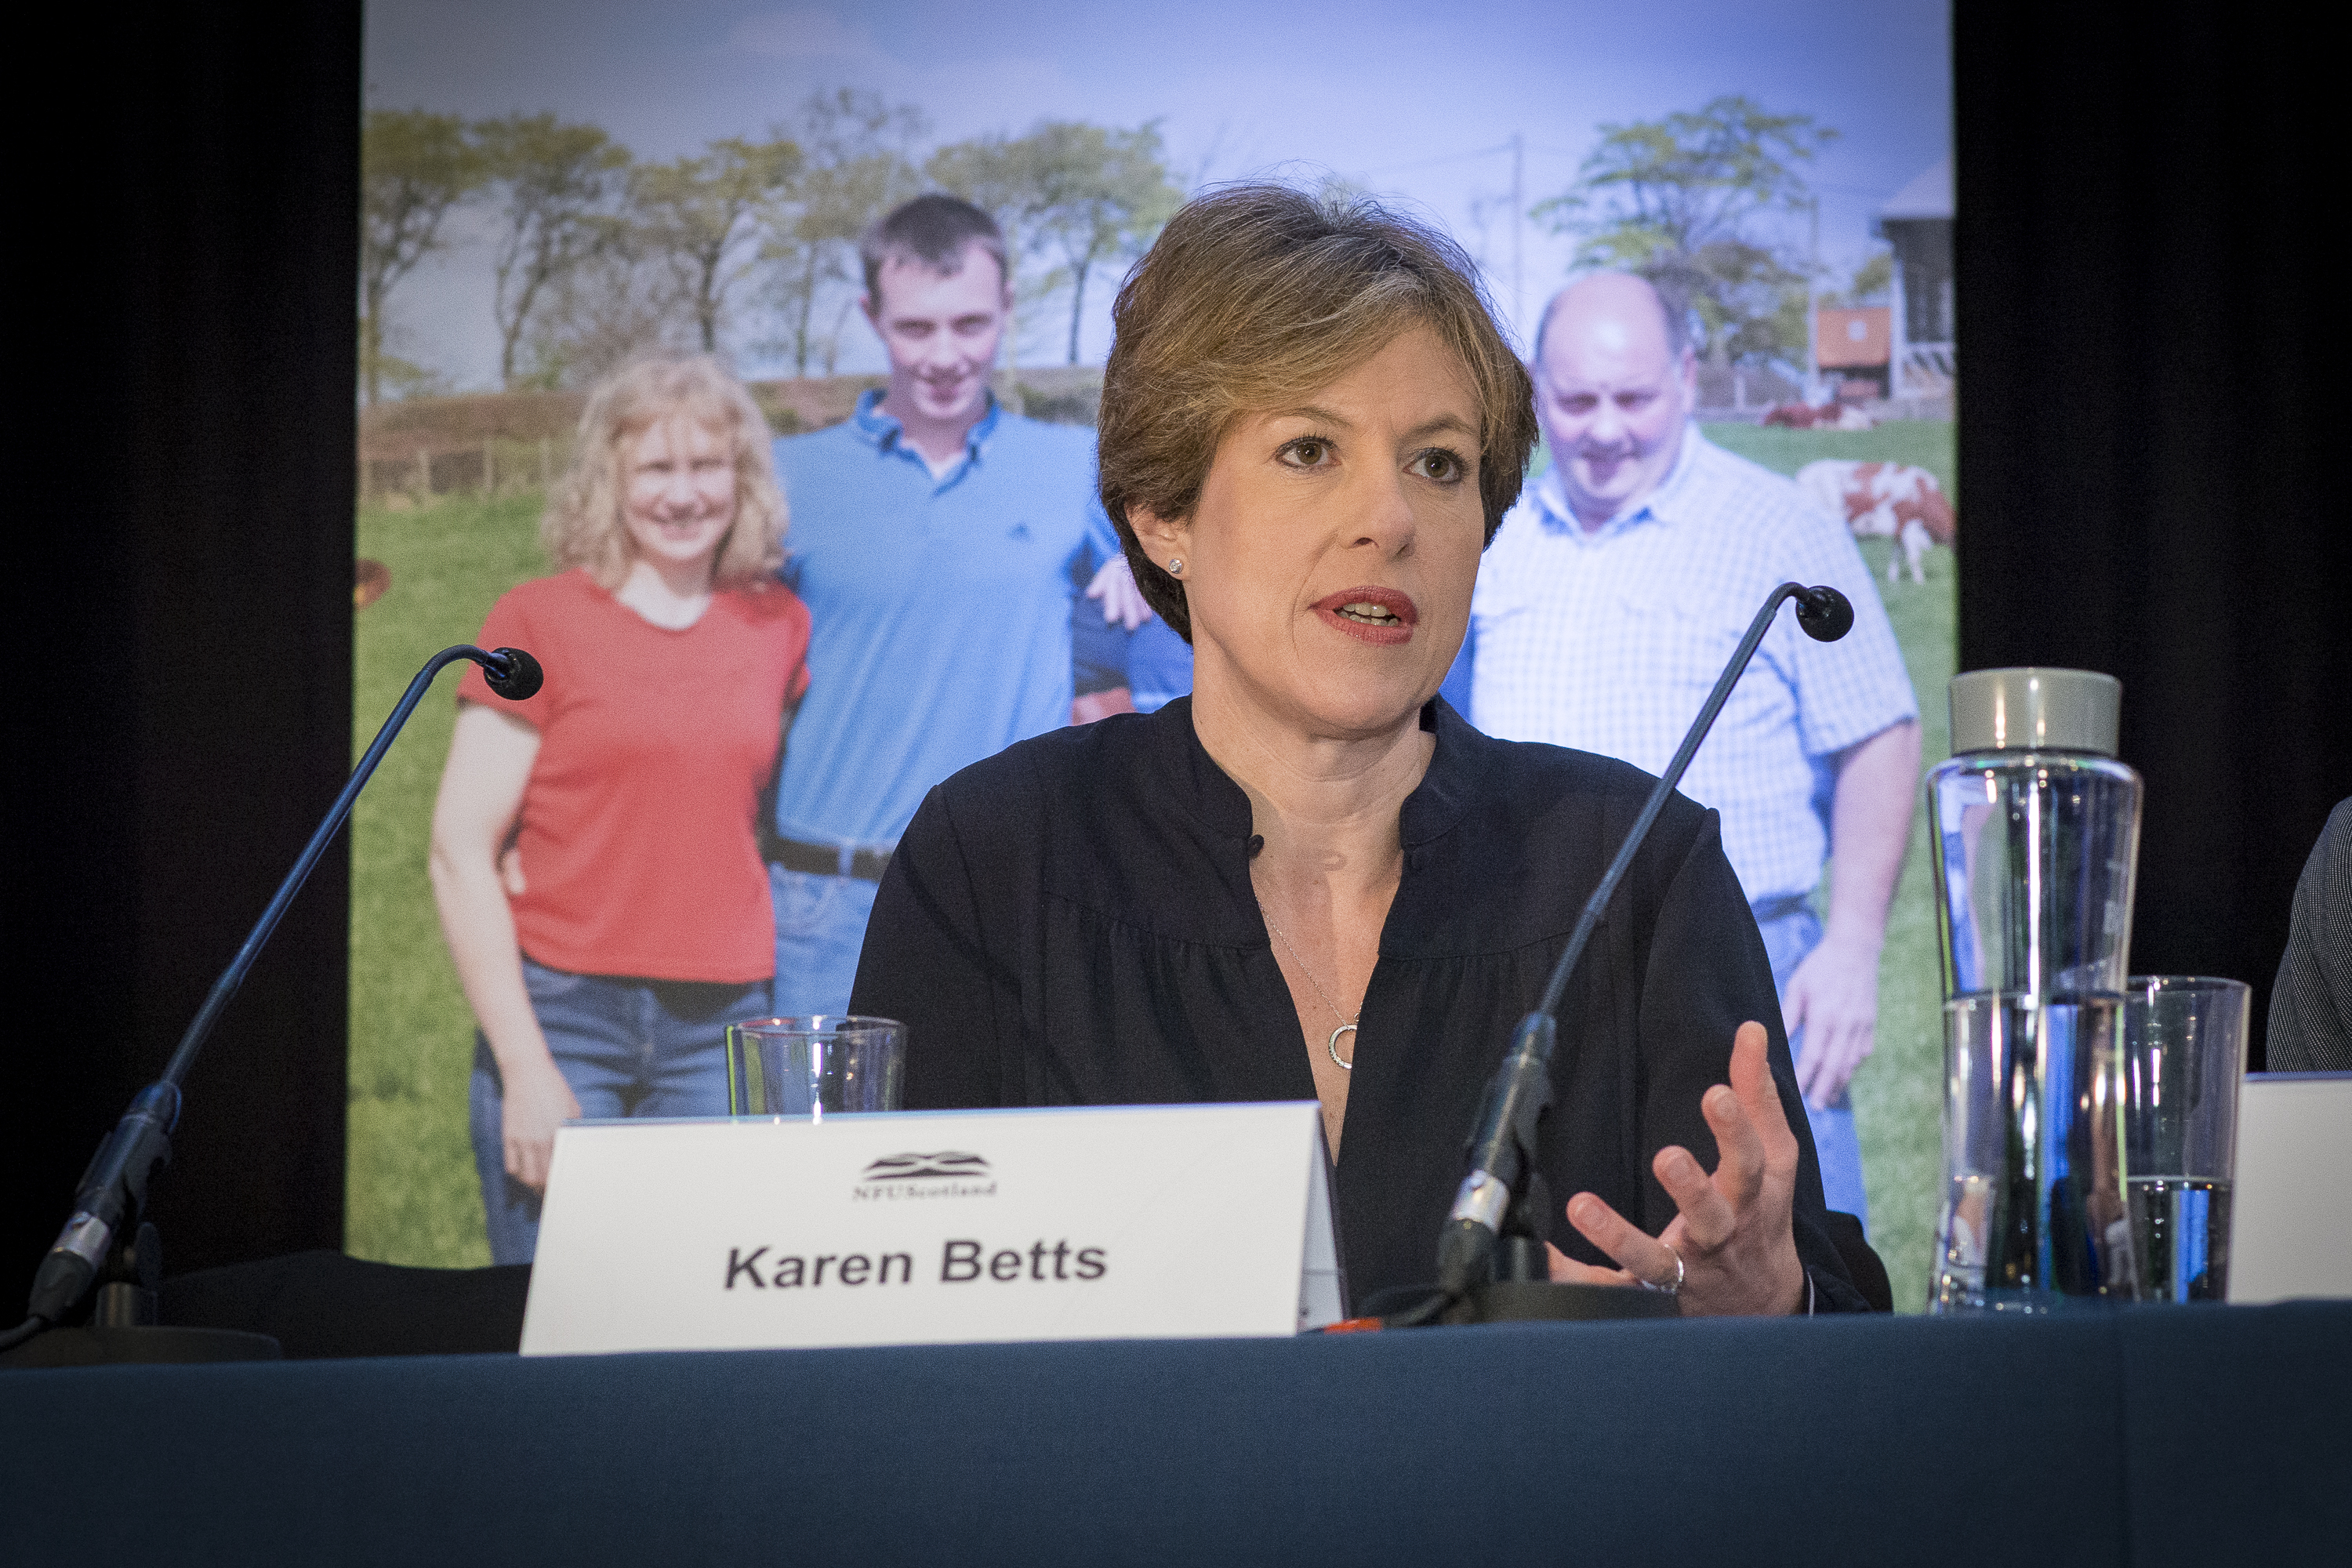 Karen Betts, who joined the discussion panel at the NFUS annual conference